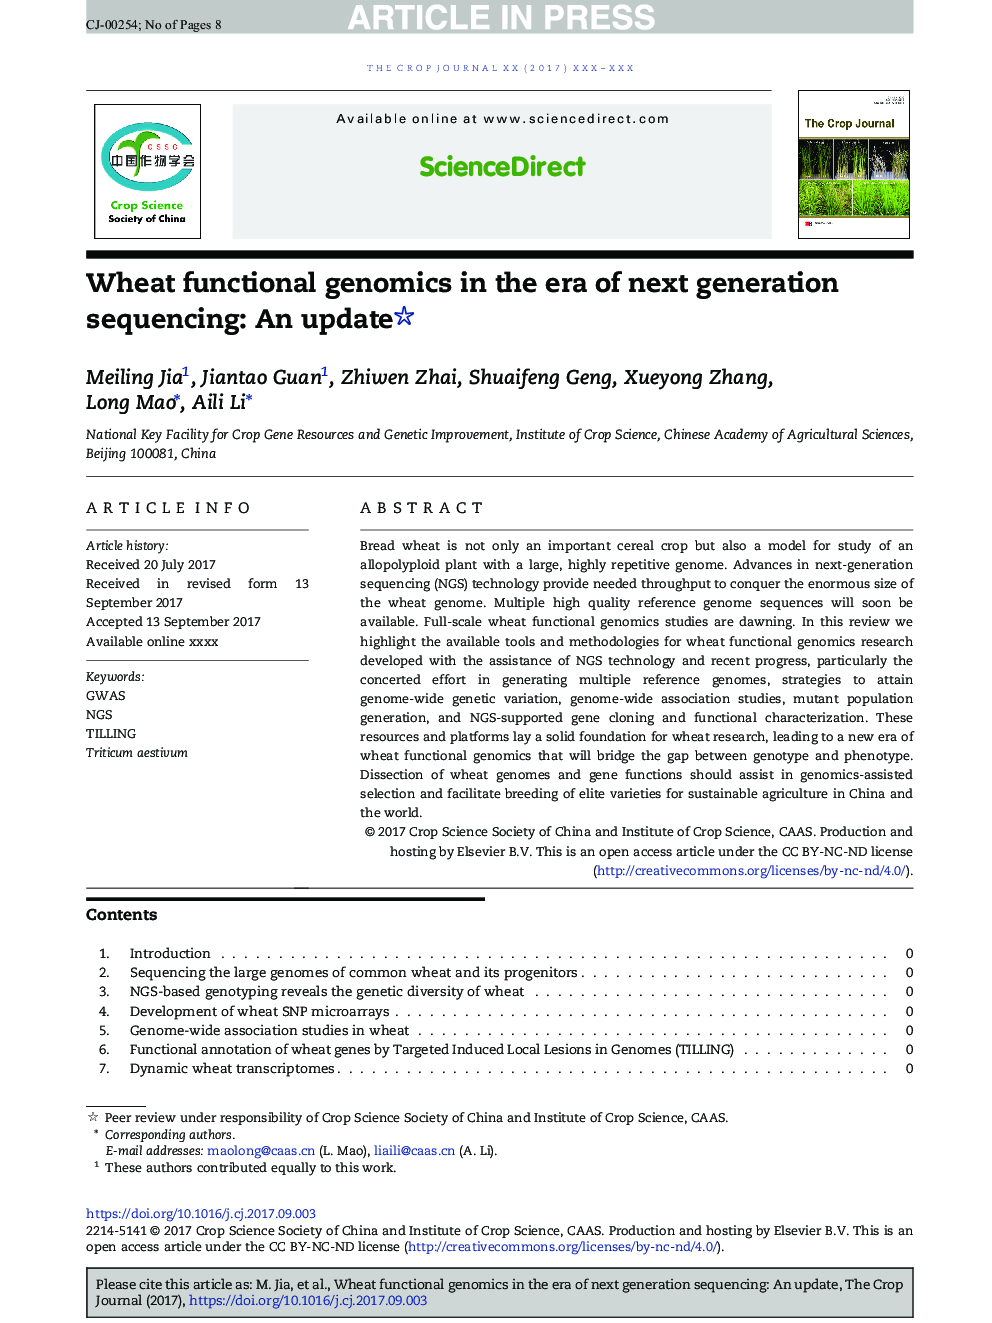 Wheat functional genomics in the era of next generation sequencing: An update